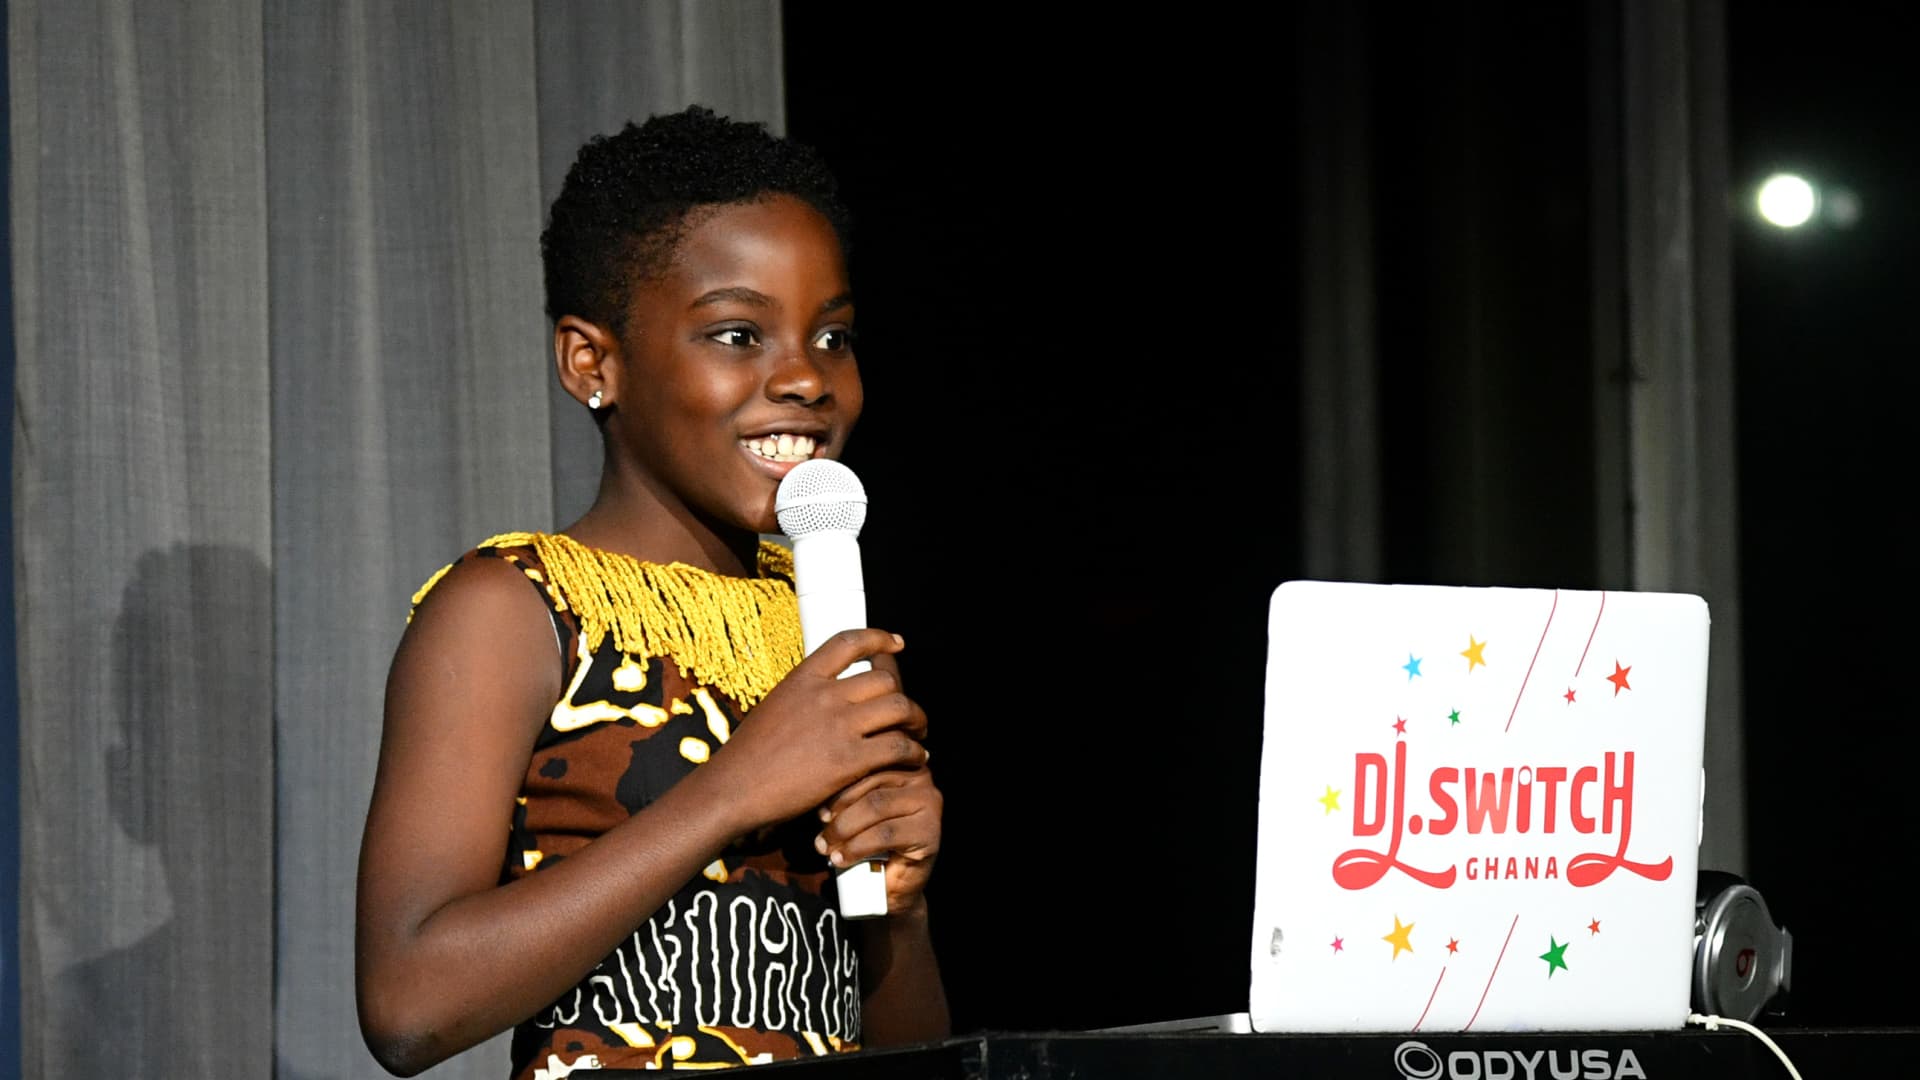 Meet the 11-year-old DJ who's caught the attention of Jay-Z and Bill and Melinda Gates